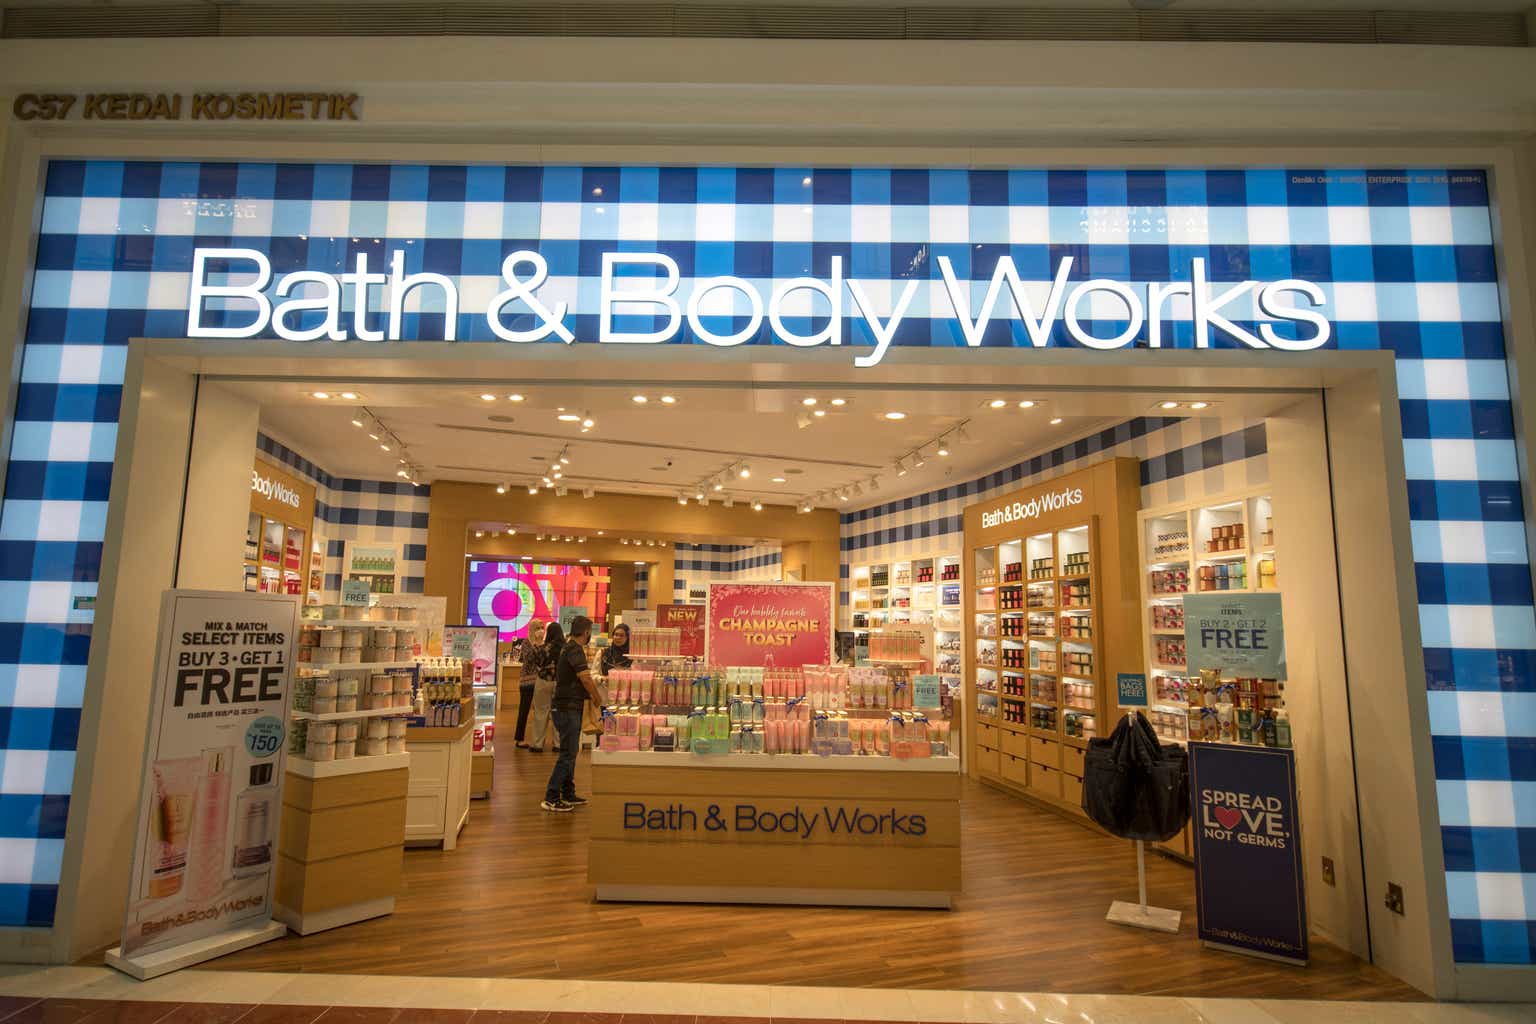 Bath & Body Works: Short-Term Pain Provides An Attractive Entry Point